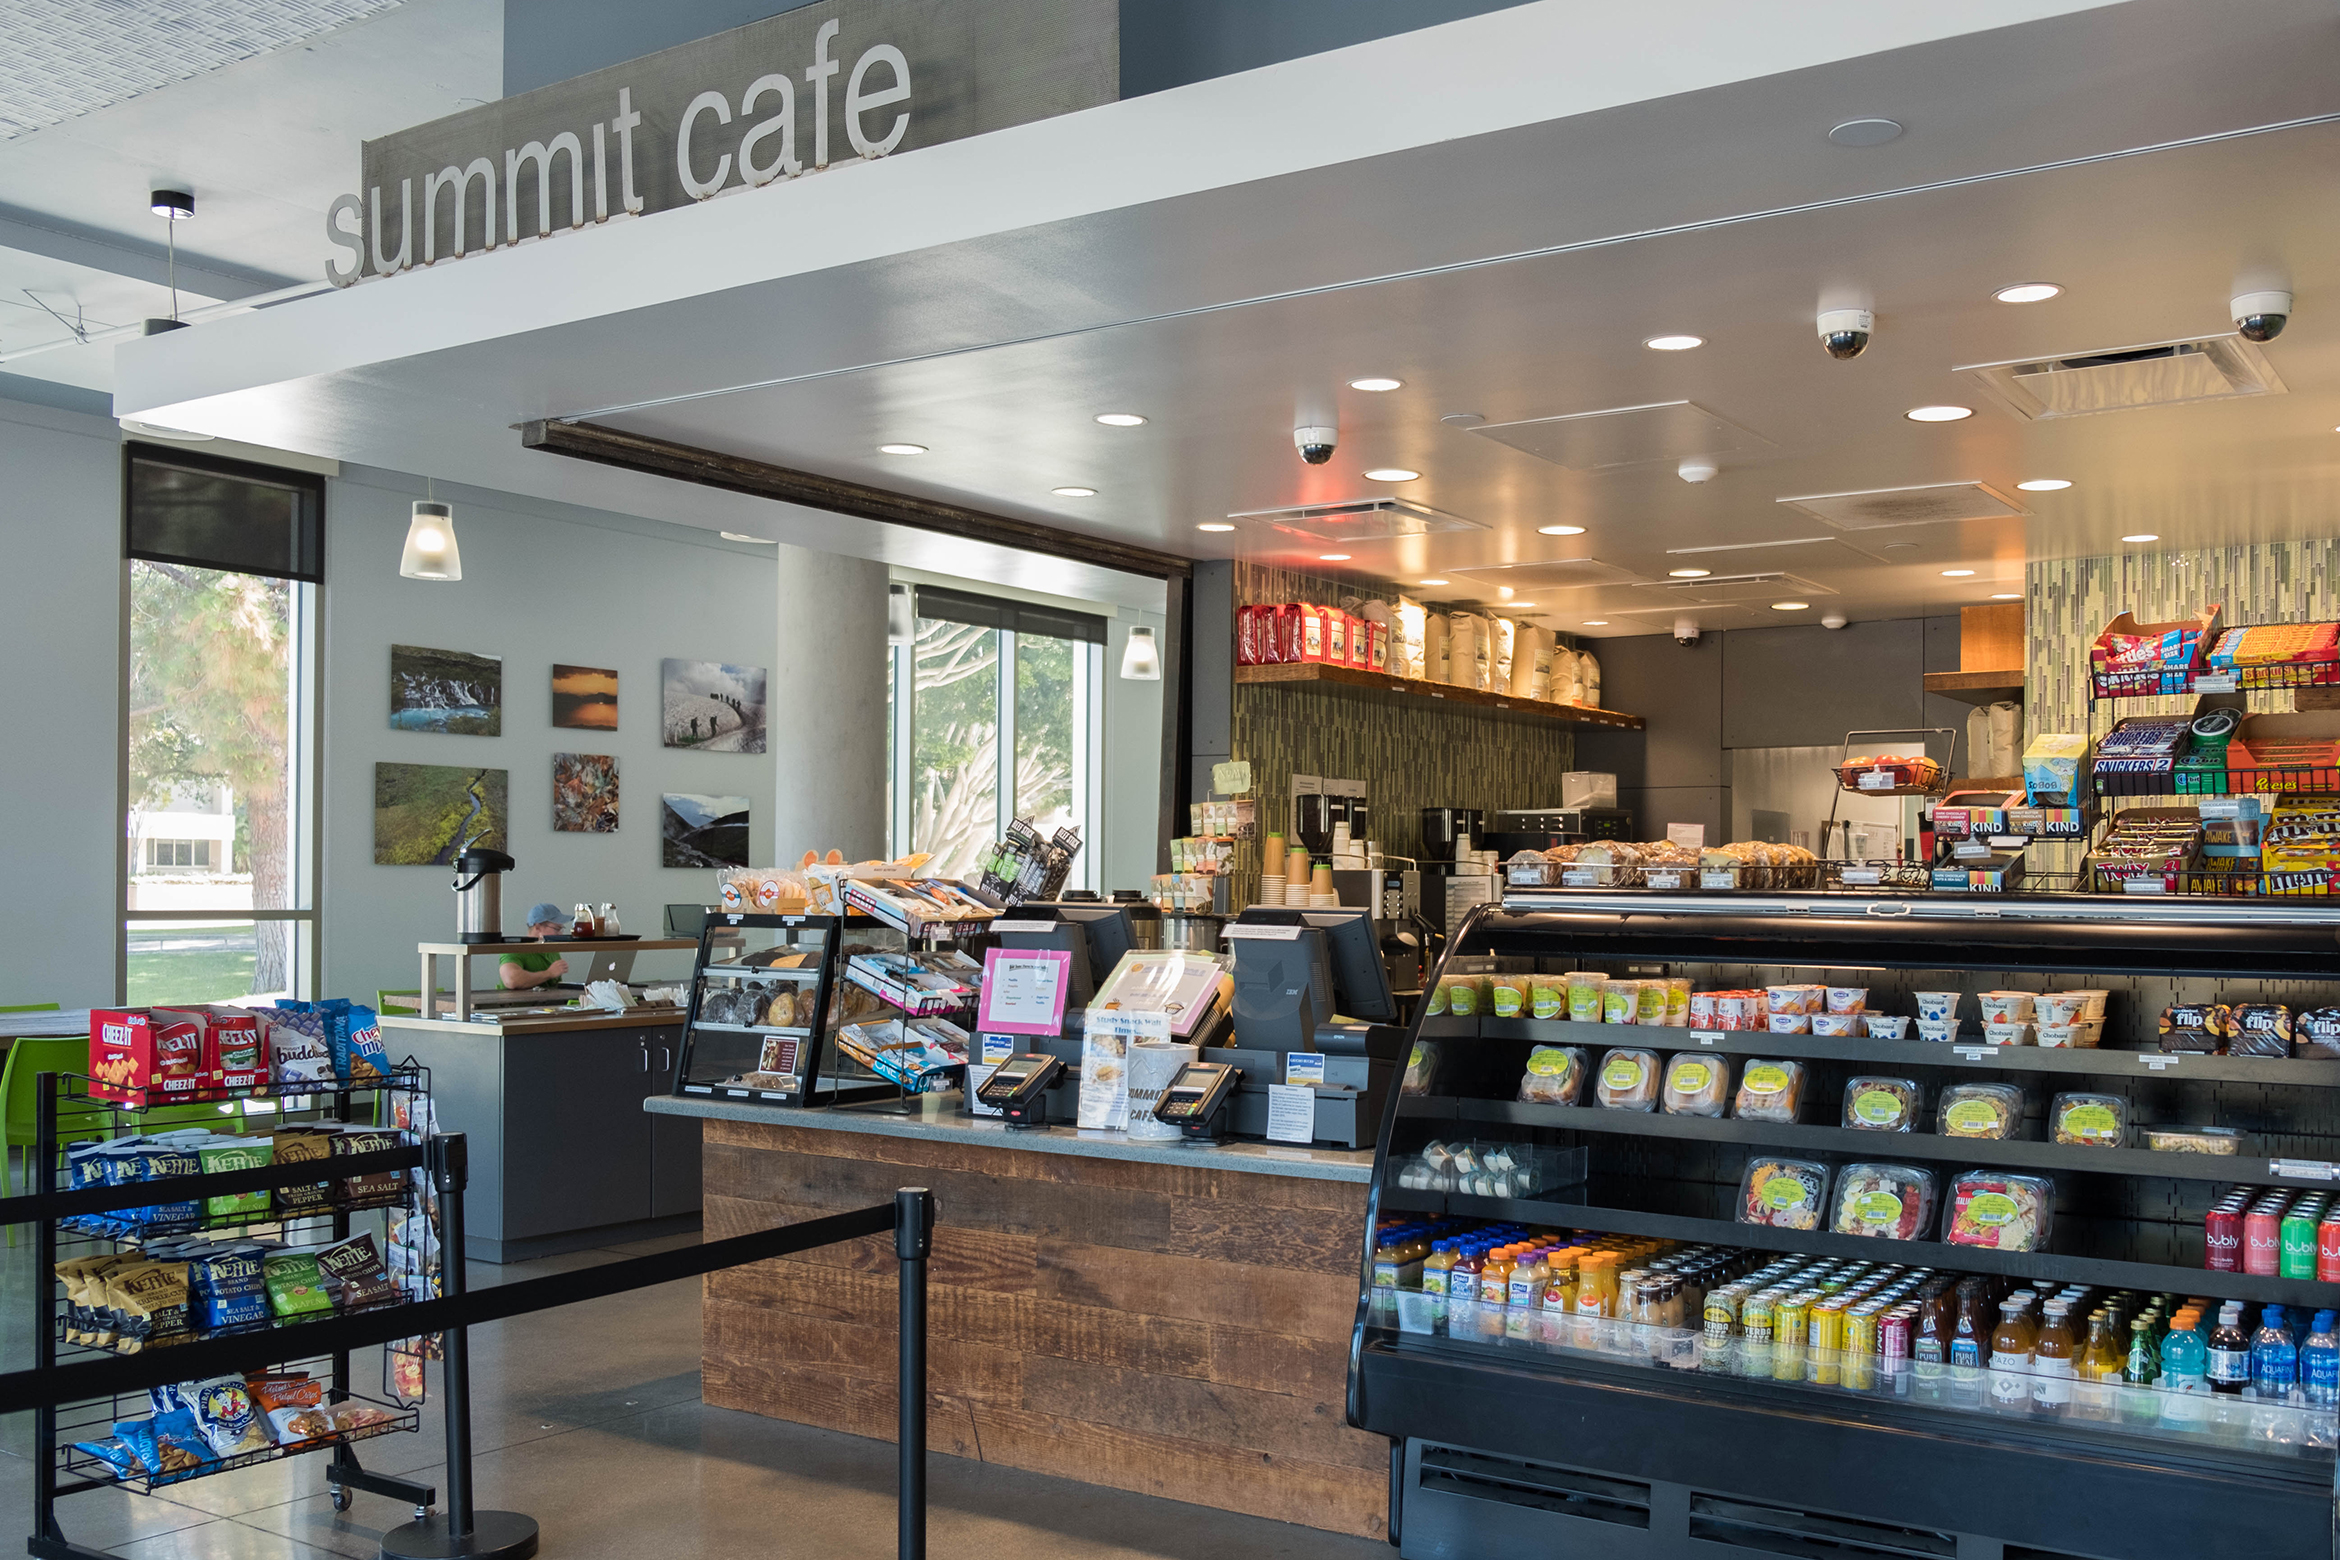 retail dining location the summit cafe